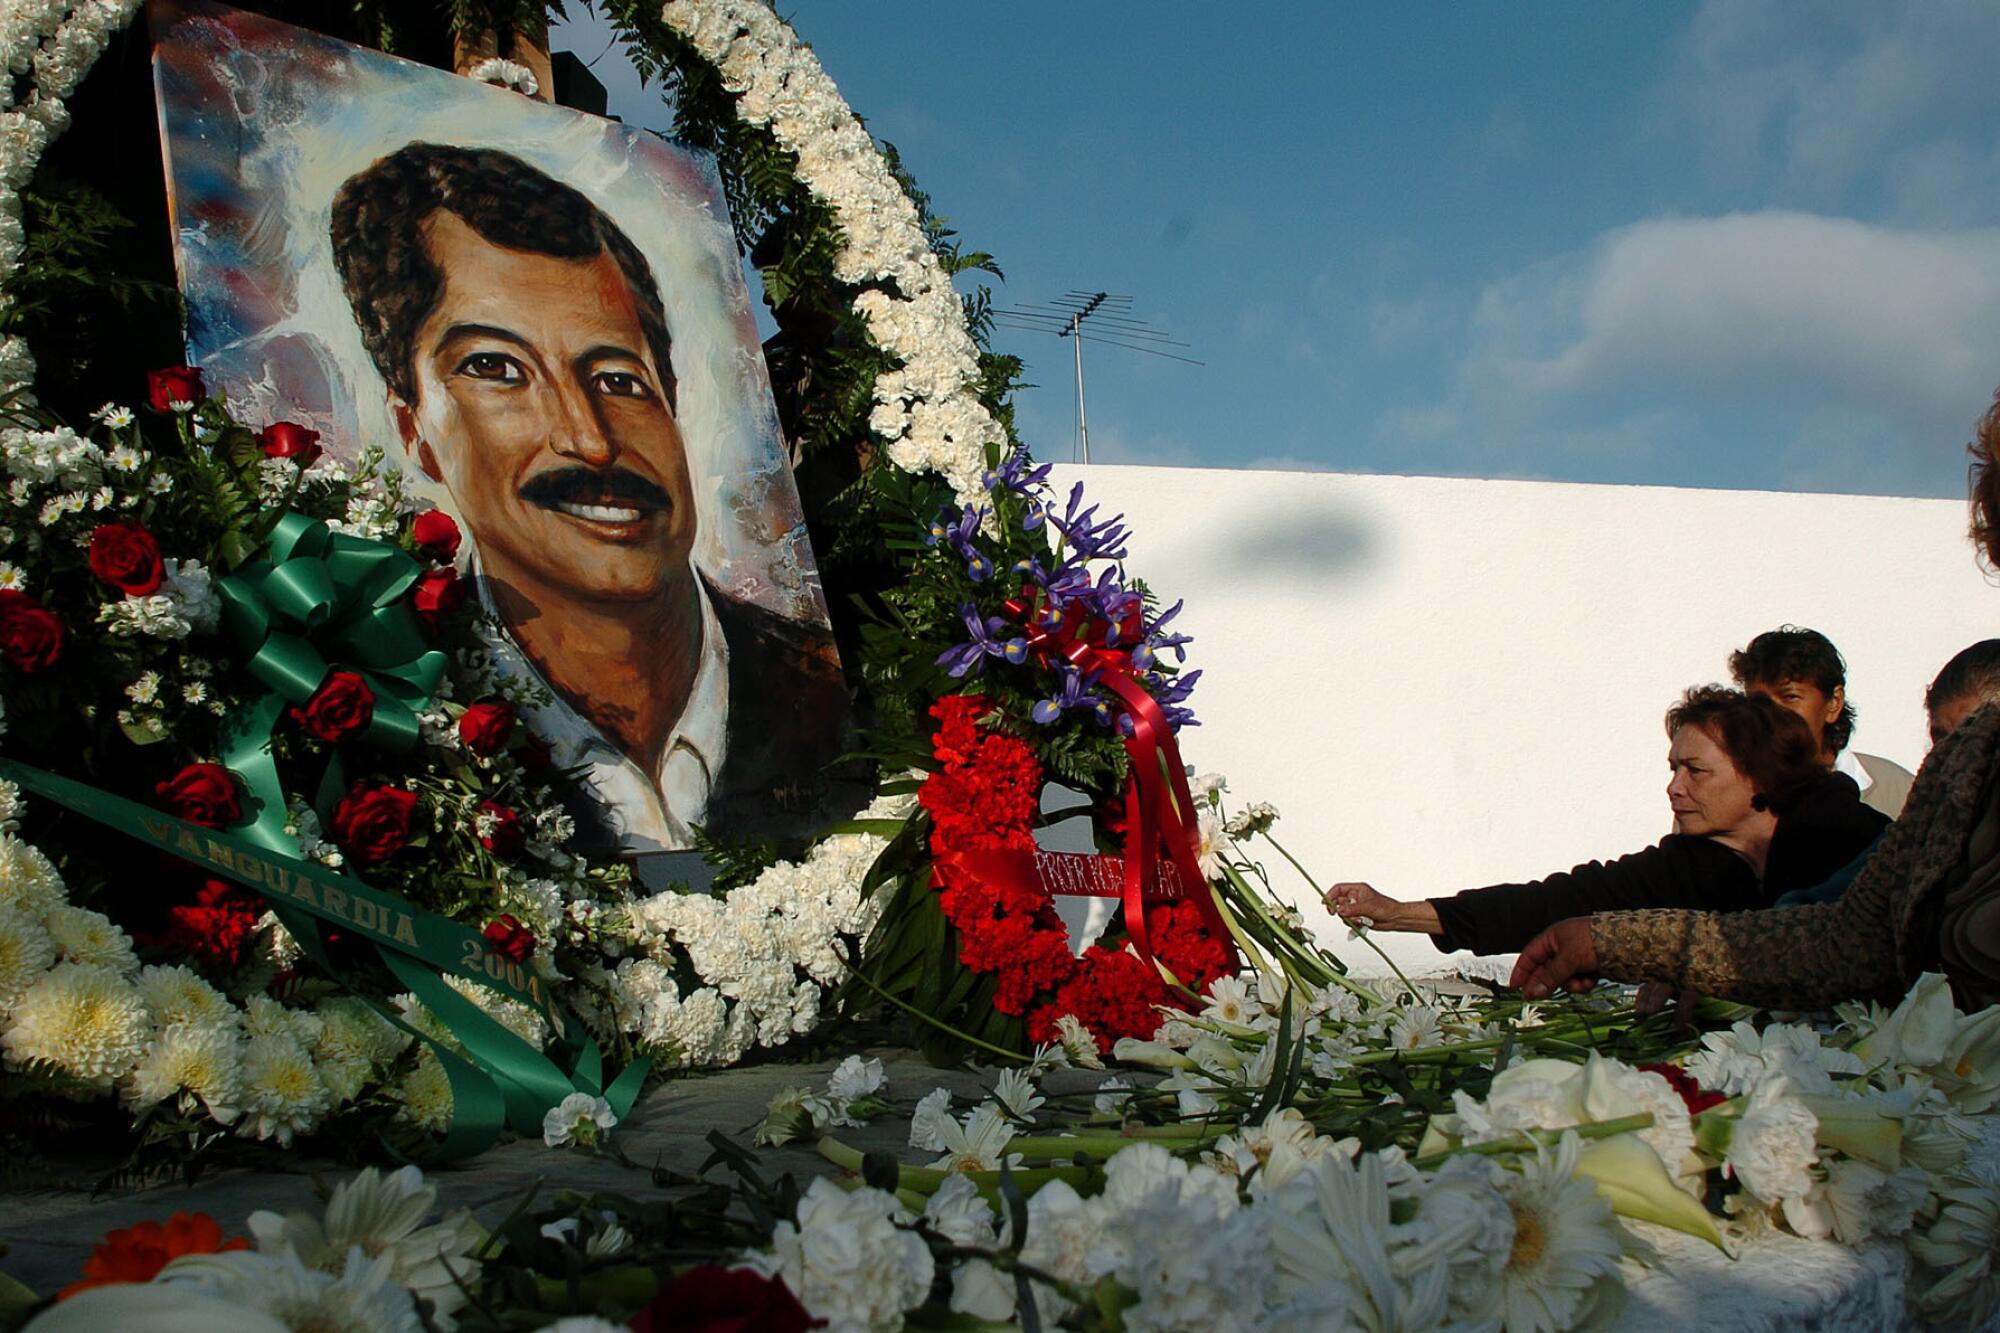 Floral tribute to Mexican presidential candidate Luis Donaldo Colosio, killed in 1994